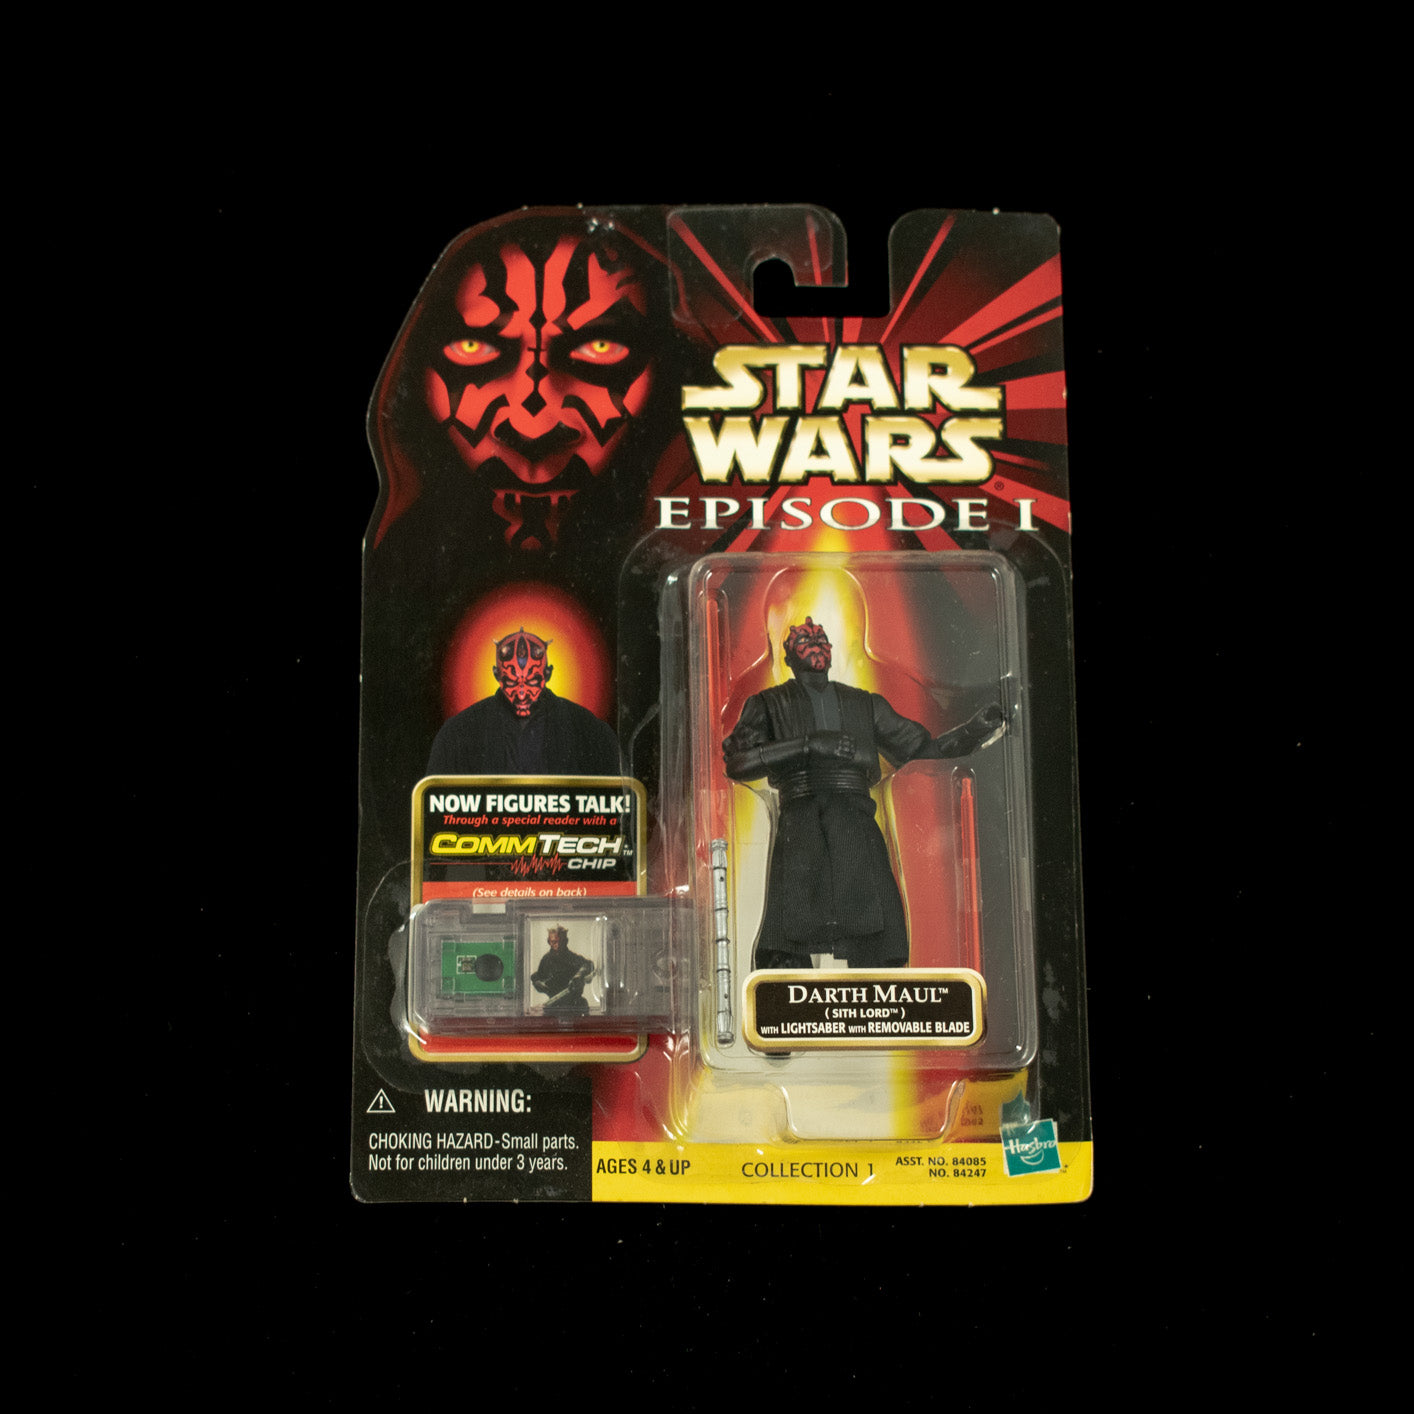 Star Wars Episode 1 Action Figure Darth Maul Sith Lord